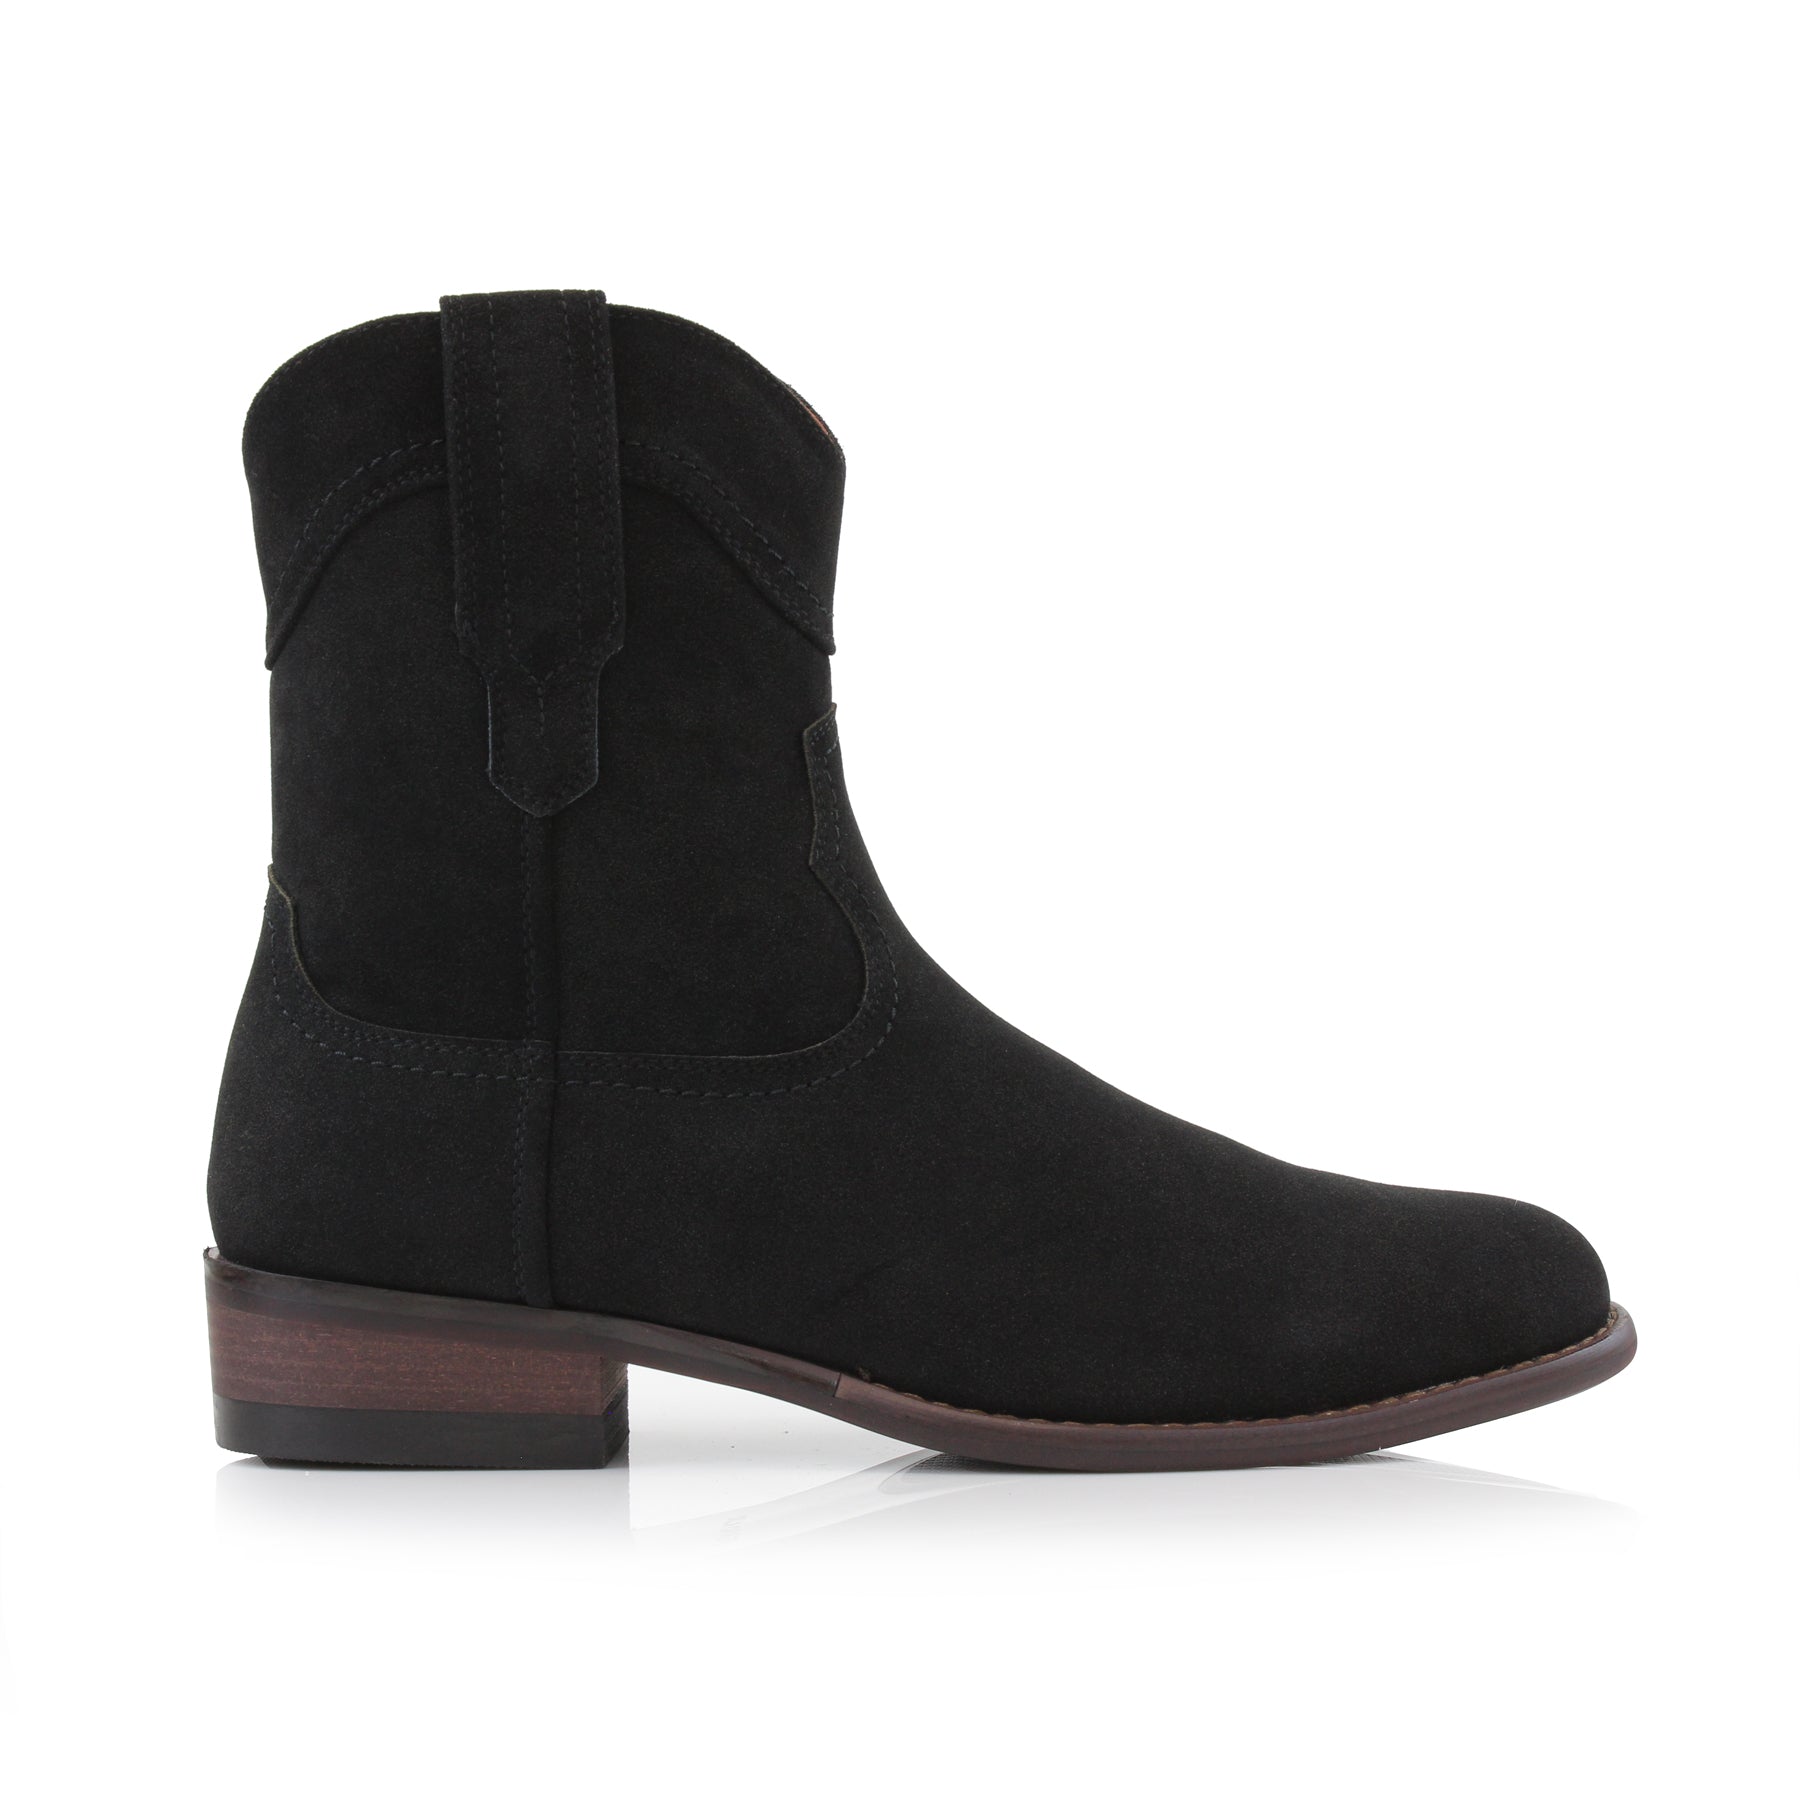 Men's Suede Western Boots | Austin by Ferro Aldo | Conal Footwear | Outer Side Angle View